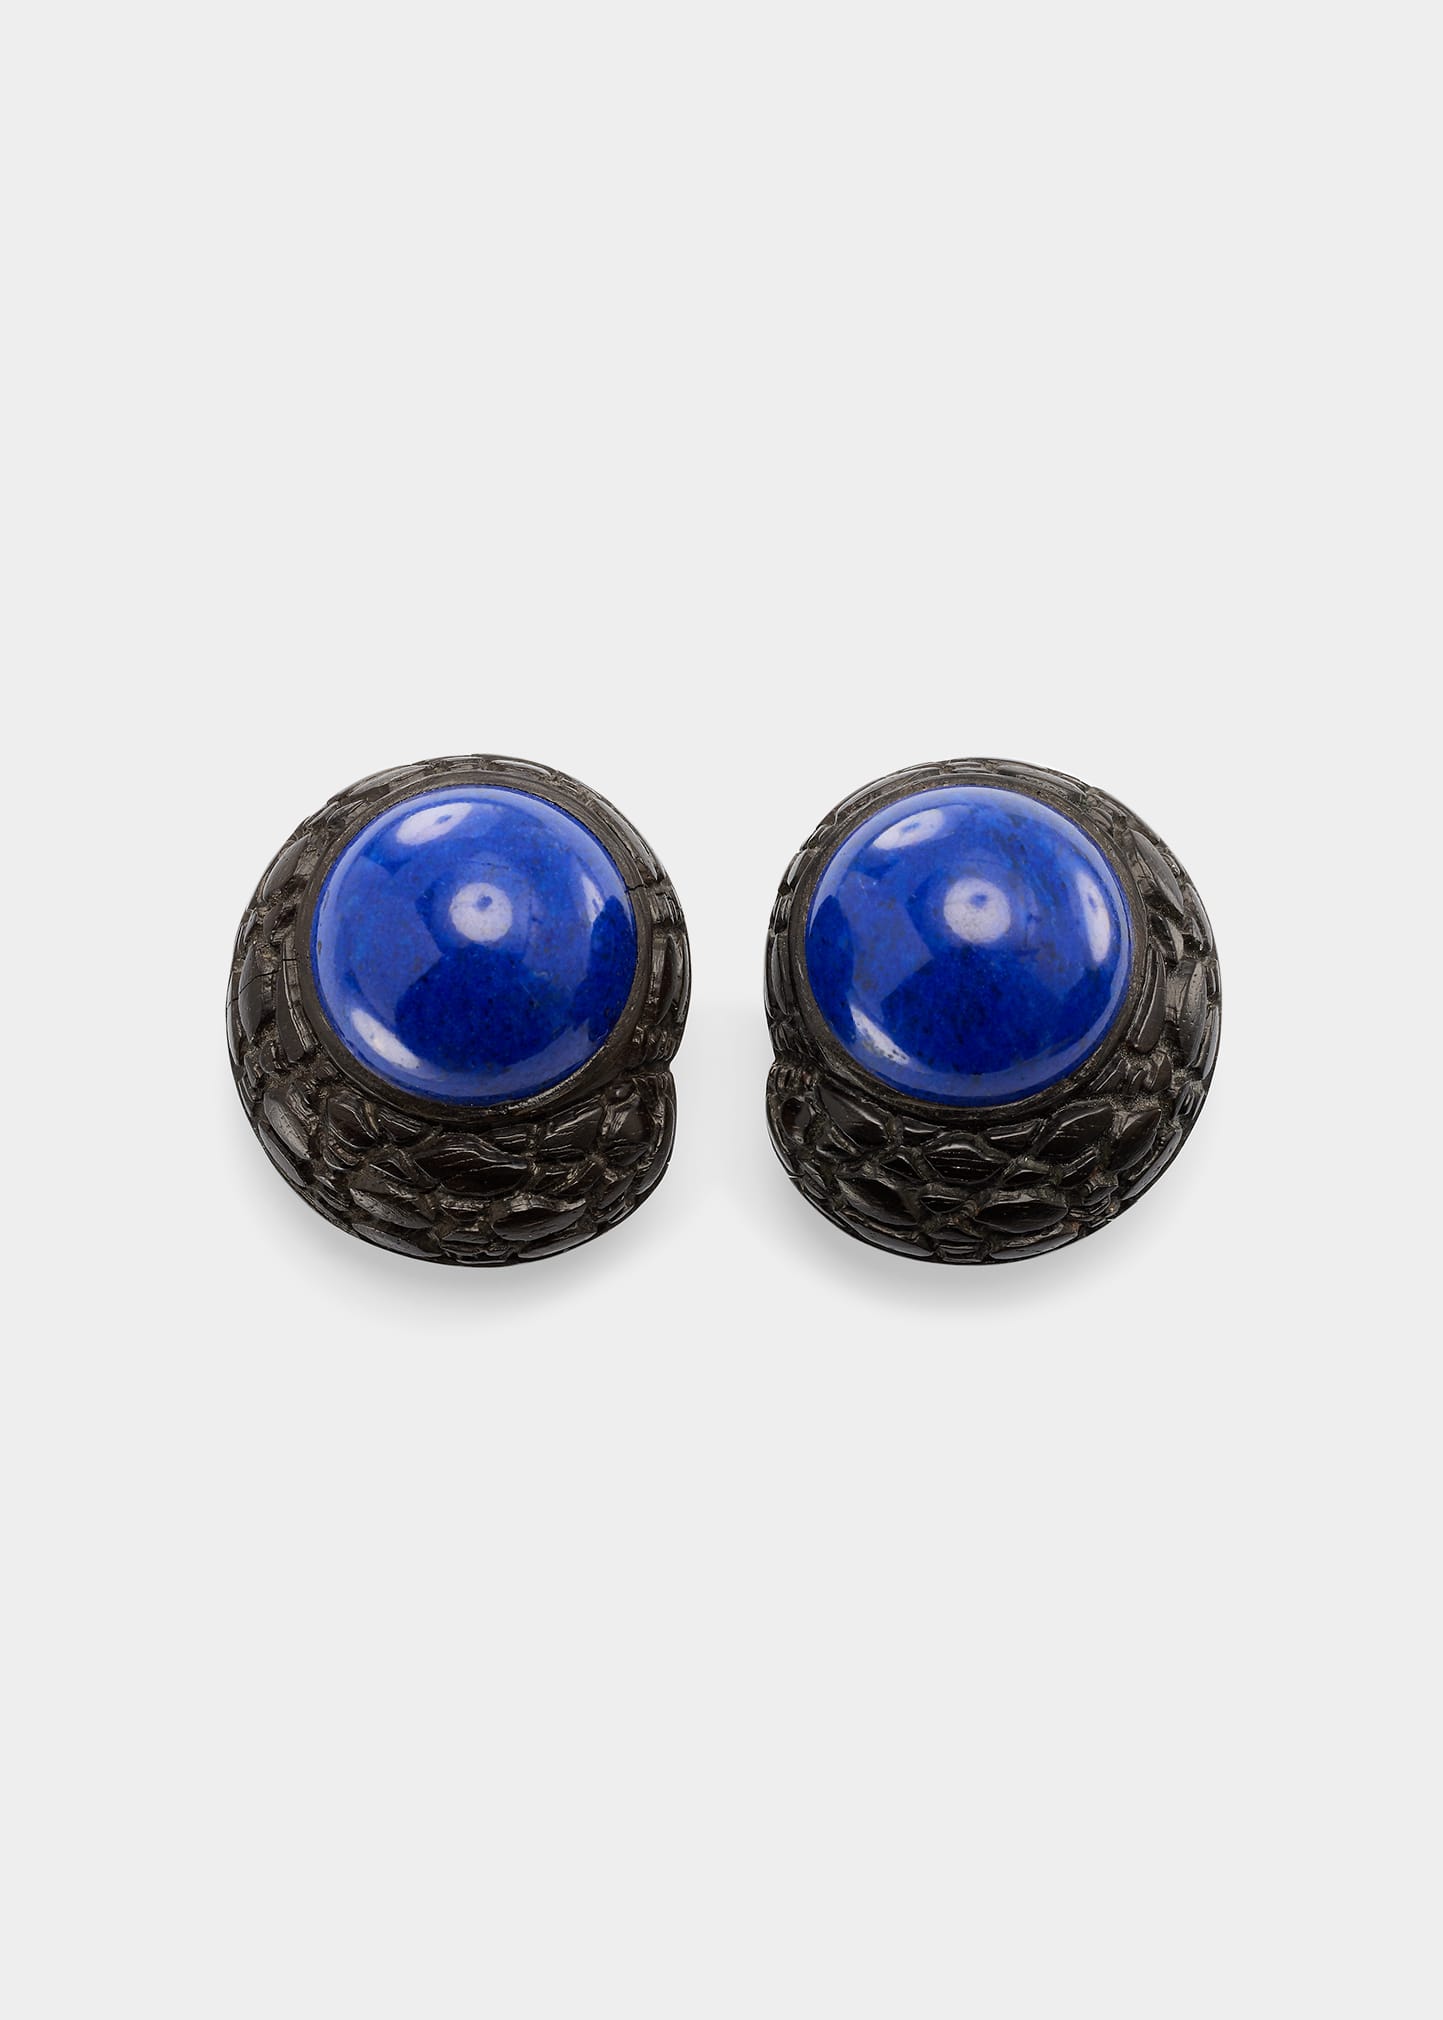 Baroque Clip Earrings in Hand-Carved Ebony and Lapis